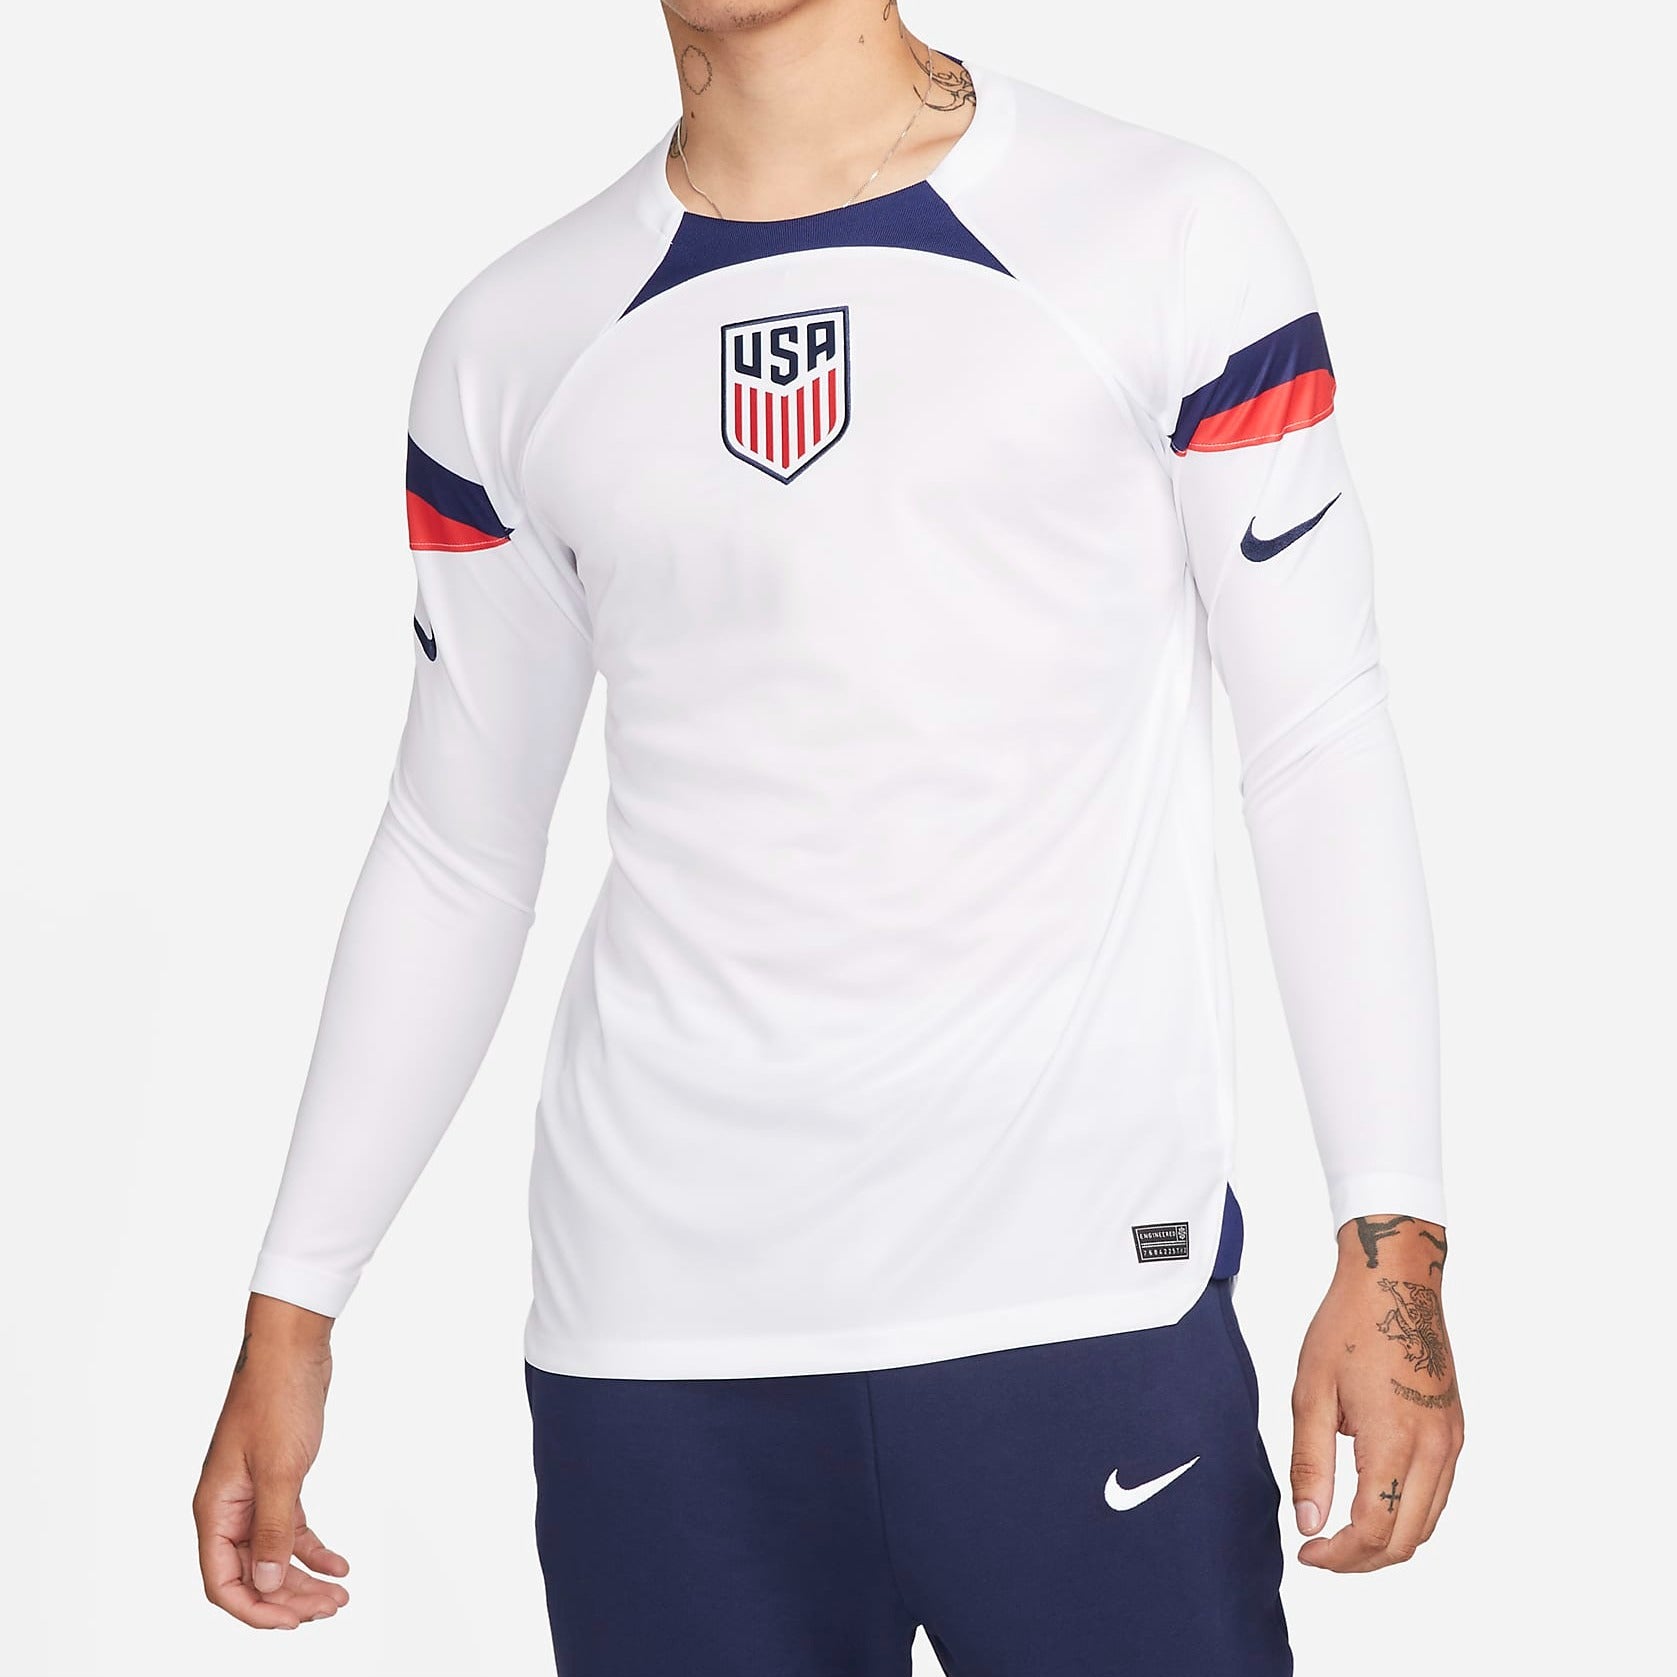 Nike USMNT '22 Home Replica Long Sleeve Jersey, Men's, Large, White